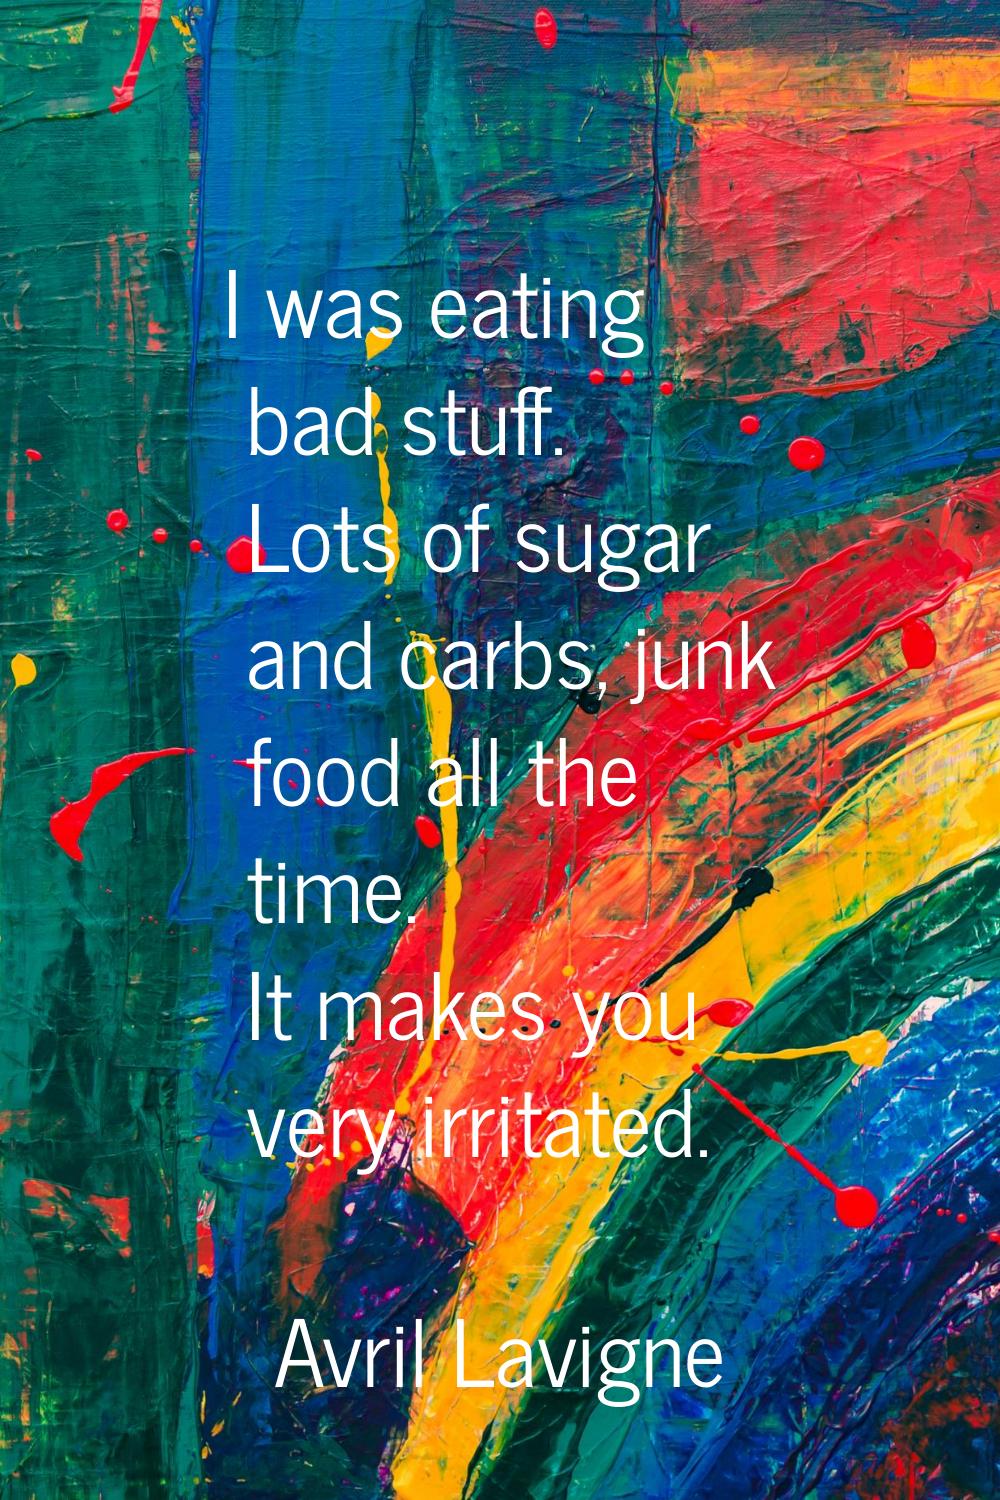 I was eating bad stuff. Lots of sugar and carbs, junk food all the time. It makes you very irritate